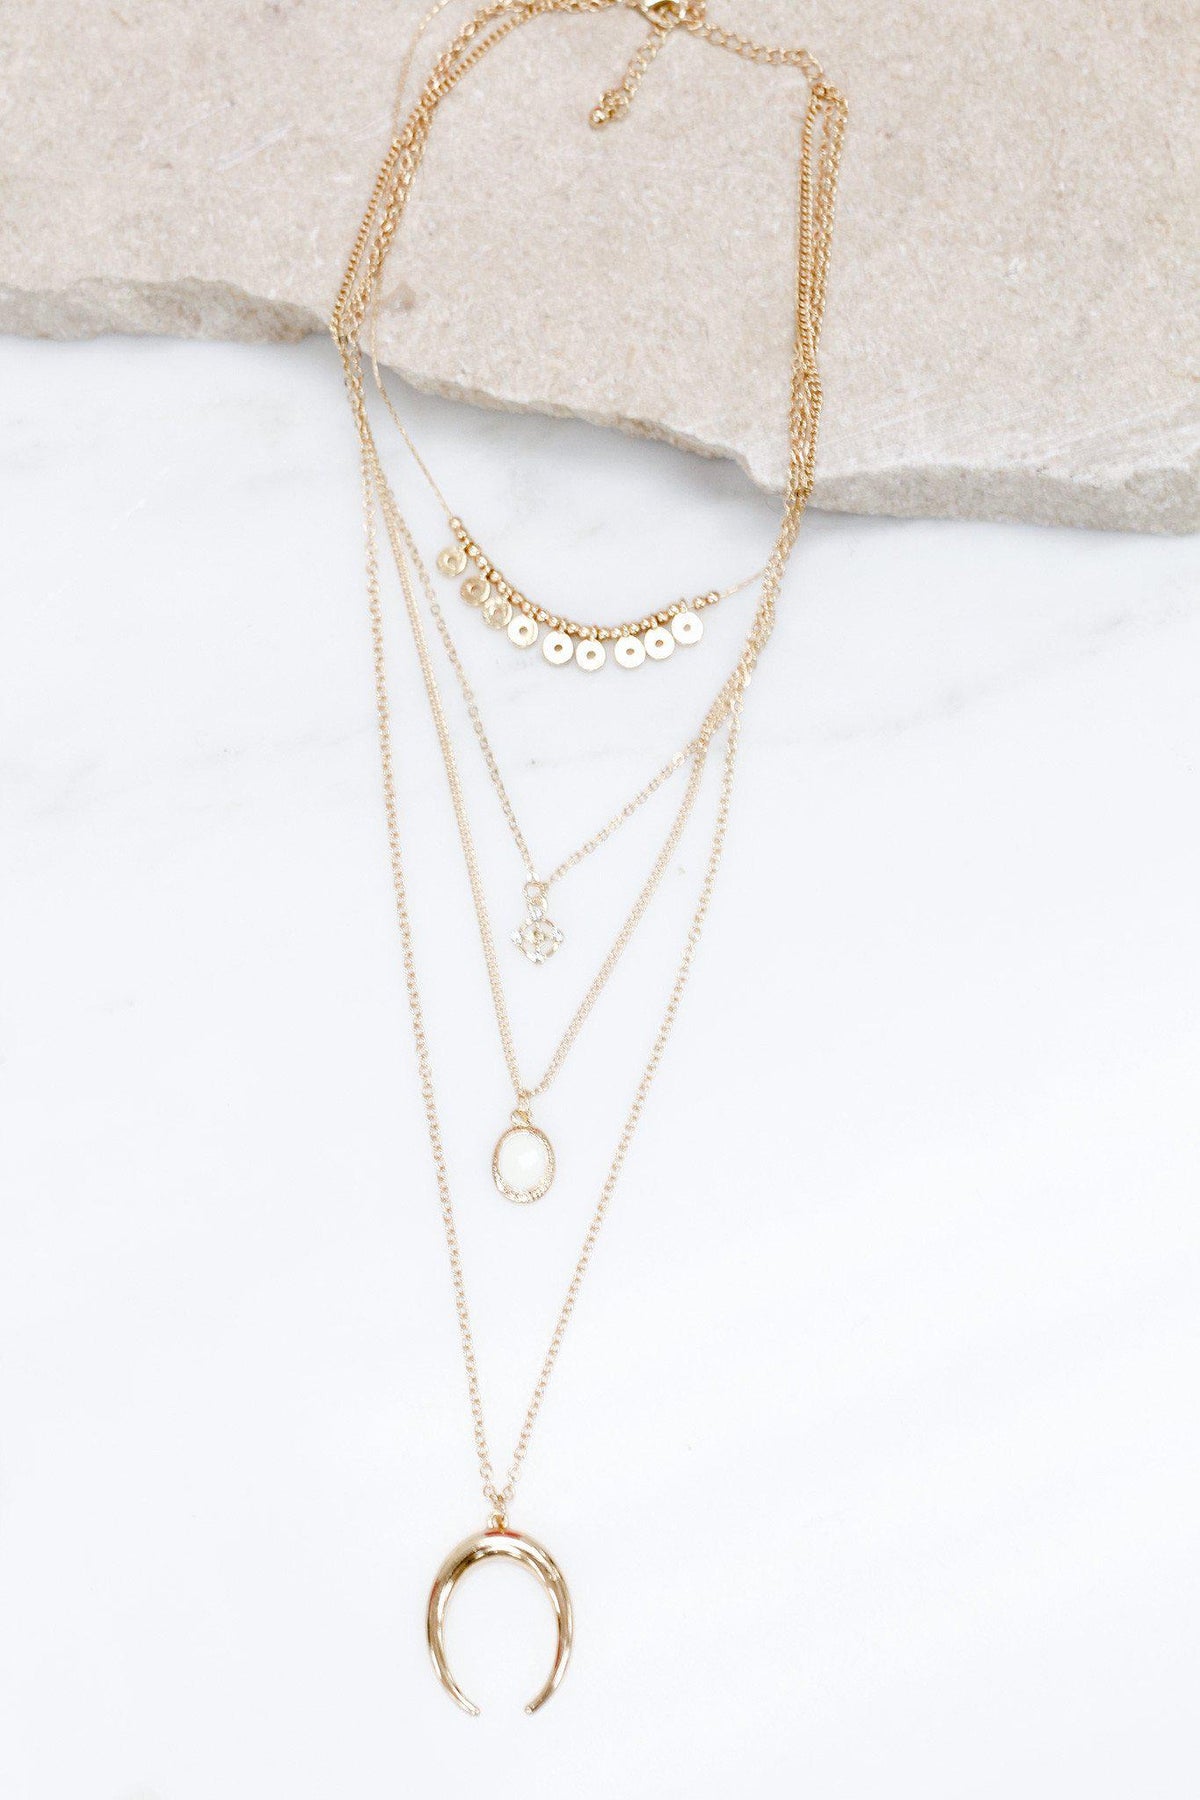 Four Layered Gold Choker Necklace – Saved by the Dress